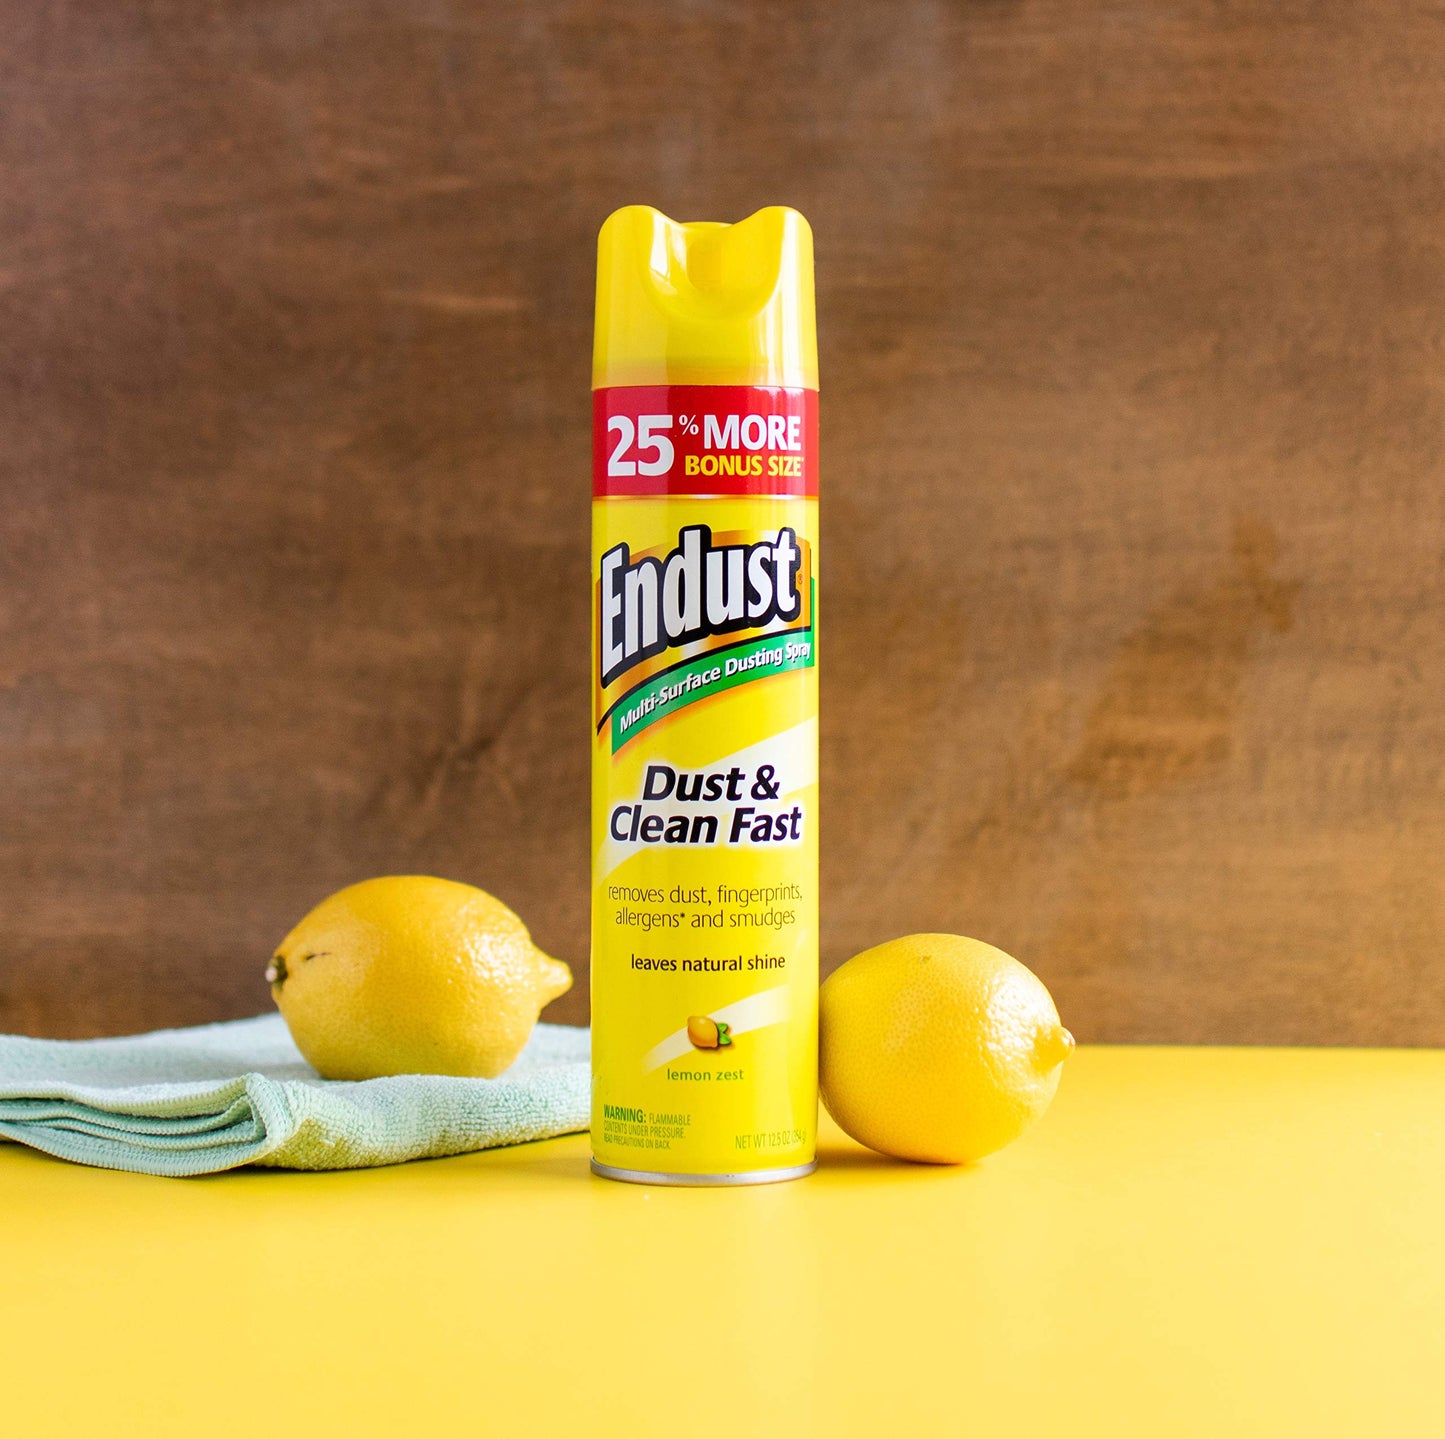 Endust Multi-Surface Dusting and Cleaning Spray, Lemon Zest, 2 Count Endust